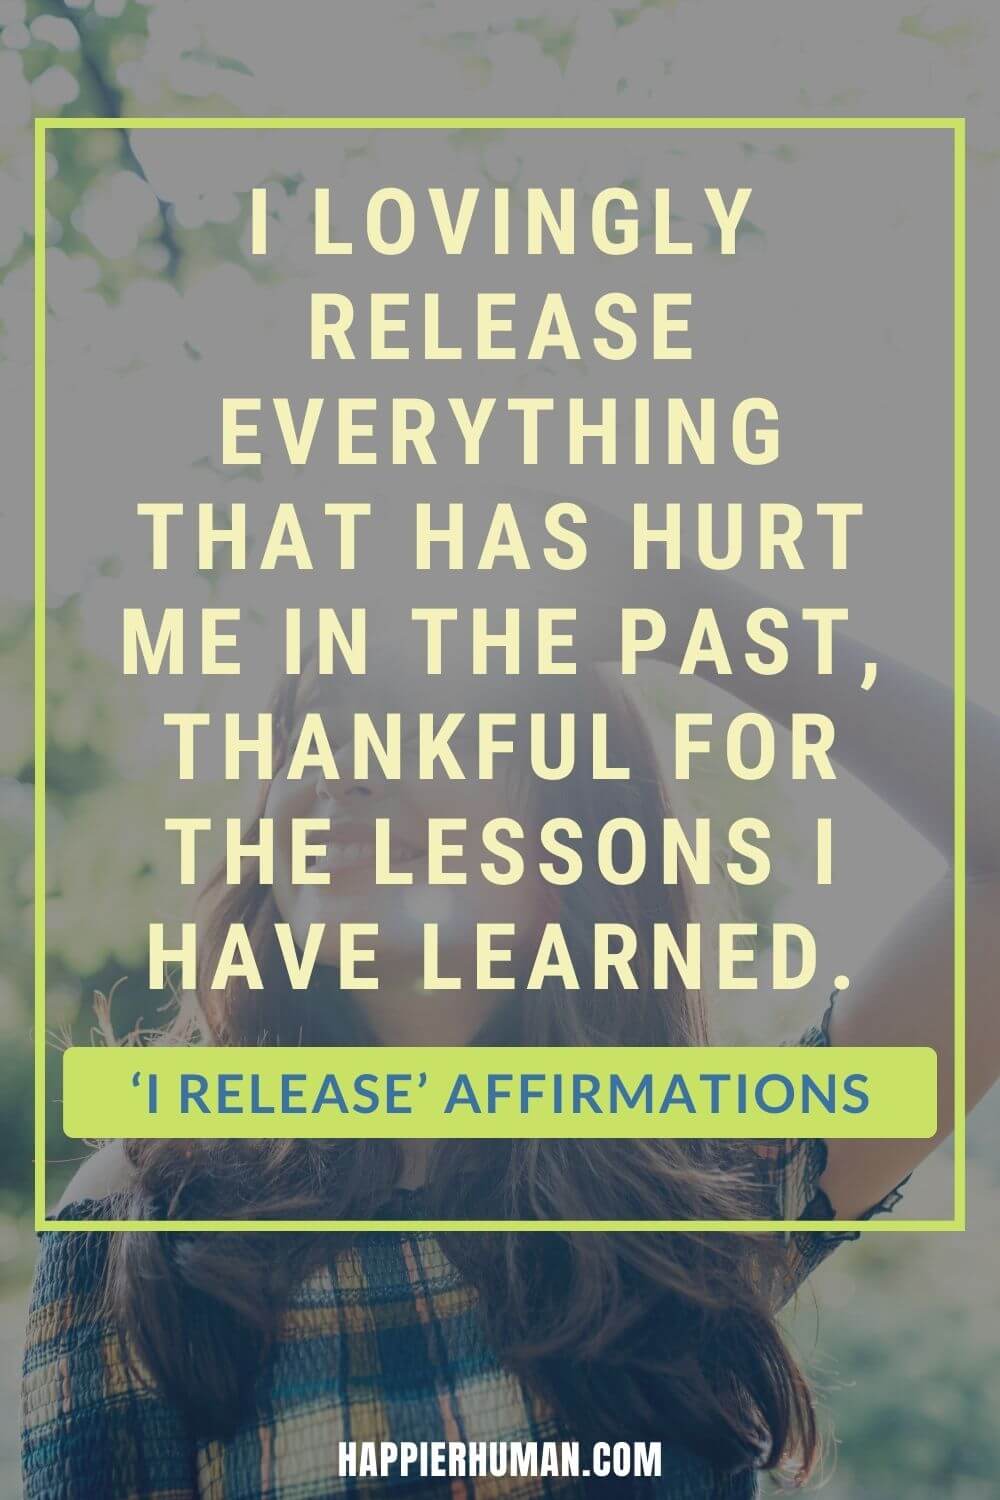 I Release Affirmations - I lovingly release everything that has hurt me in the past, thankful for the lessons I have learned. | i release you affirmations | affirmations for releasing control | affirmations to release negative energy